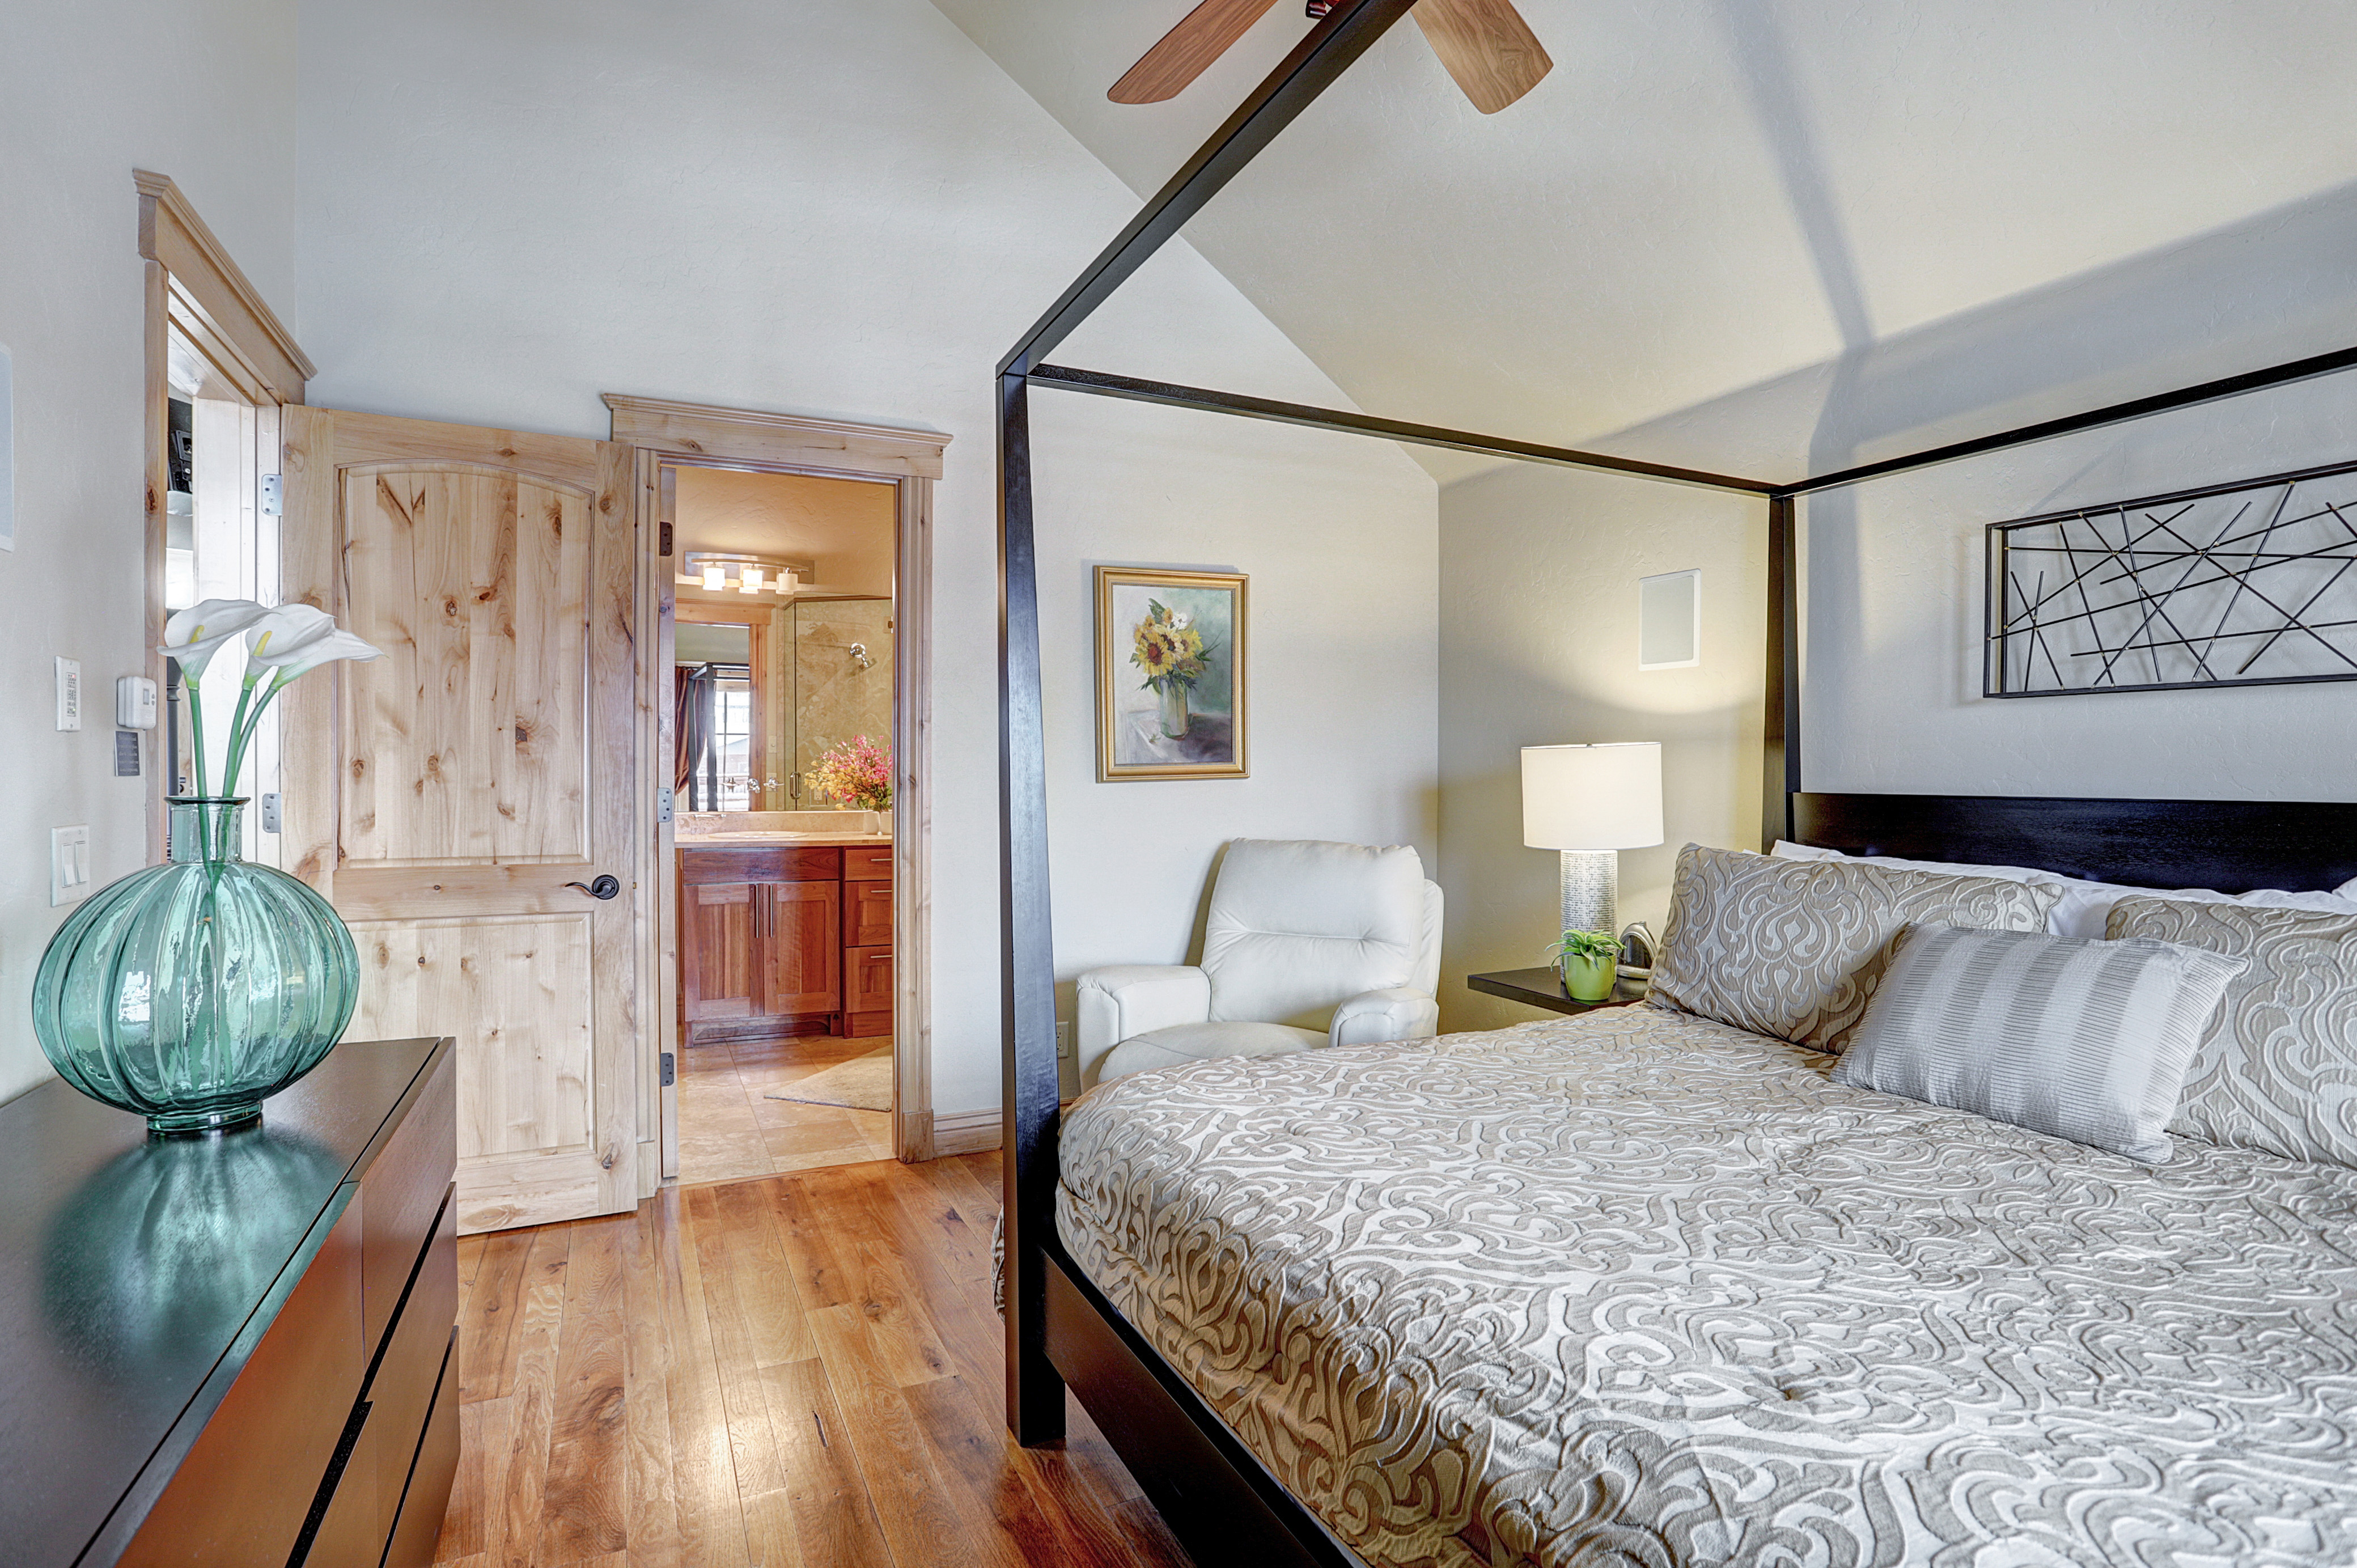 Upper level master bedroom with King-size bed, flat screen TV, and private bath